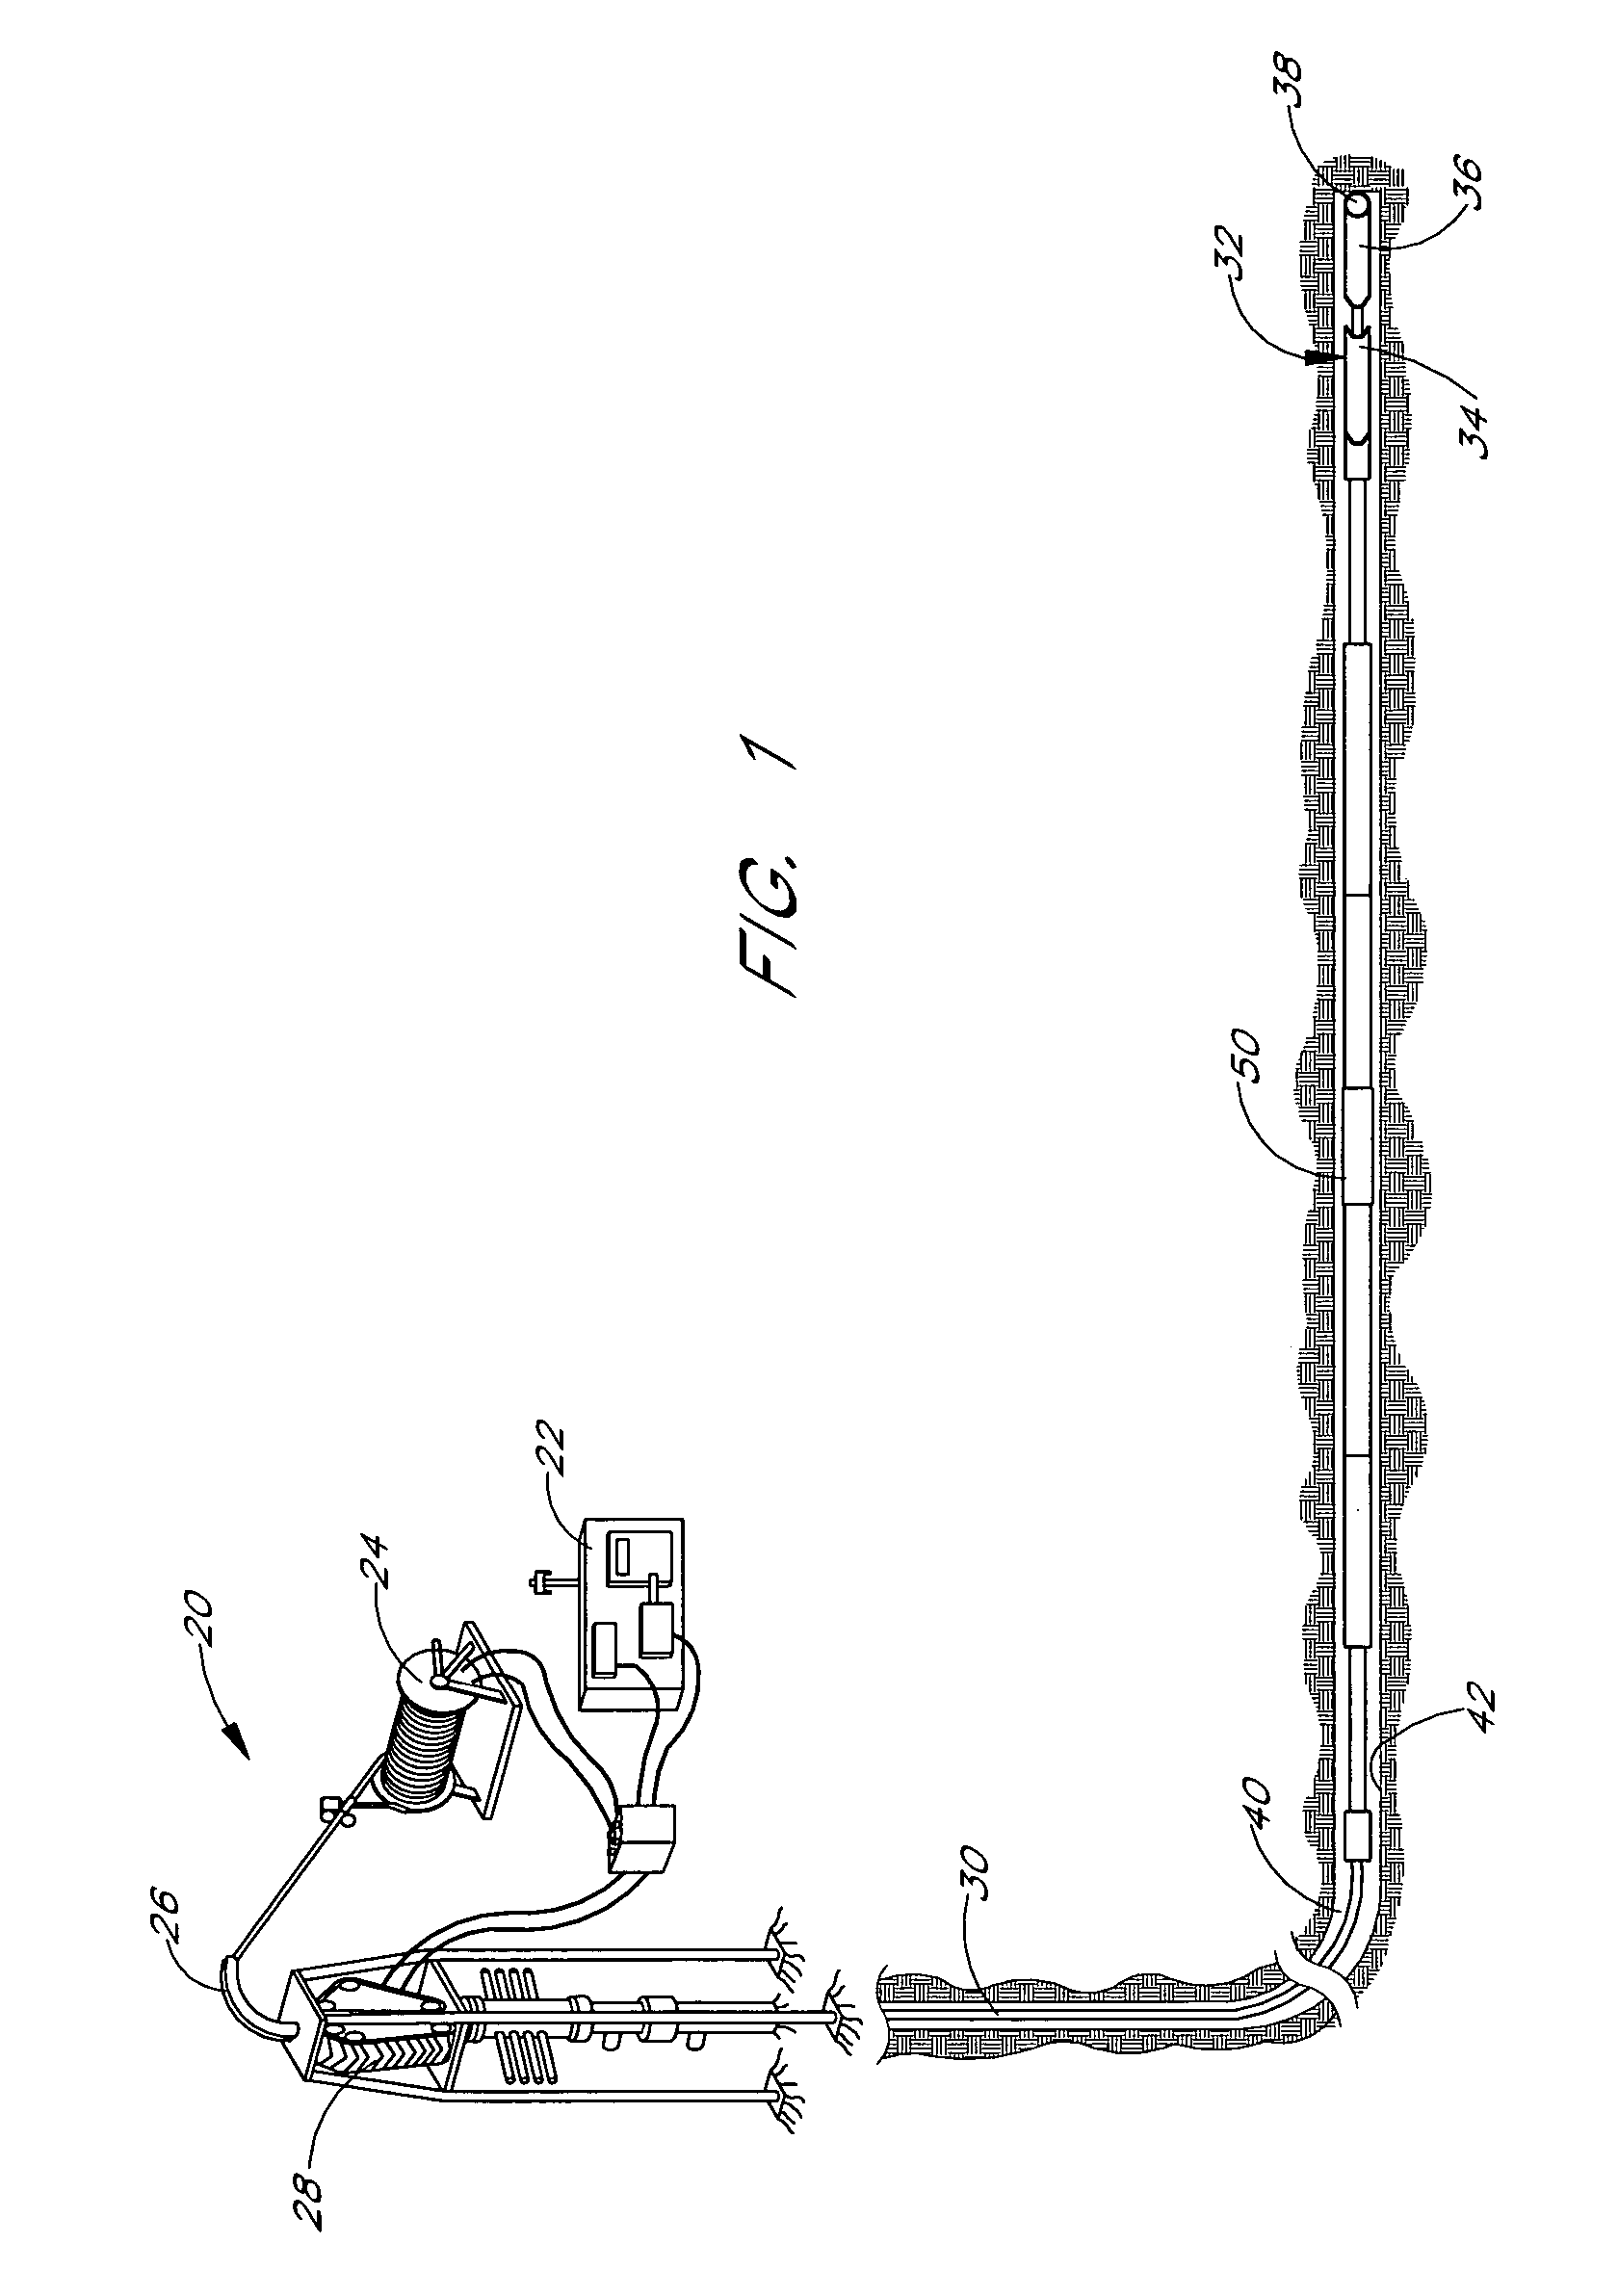 Gripper assembly for downhole tools